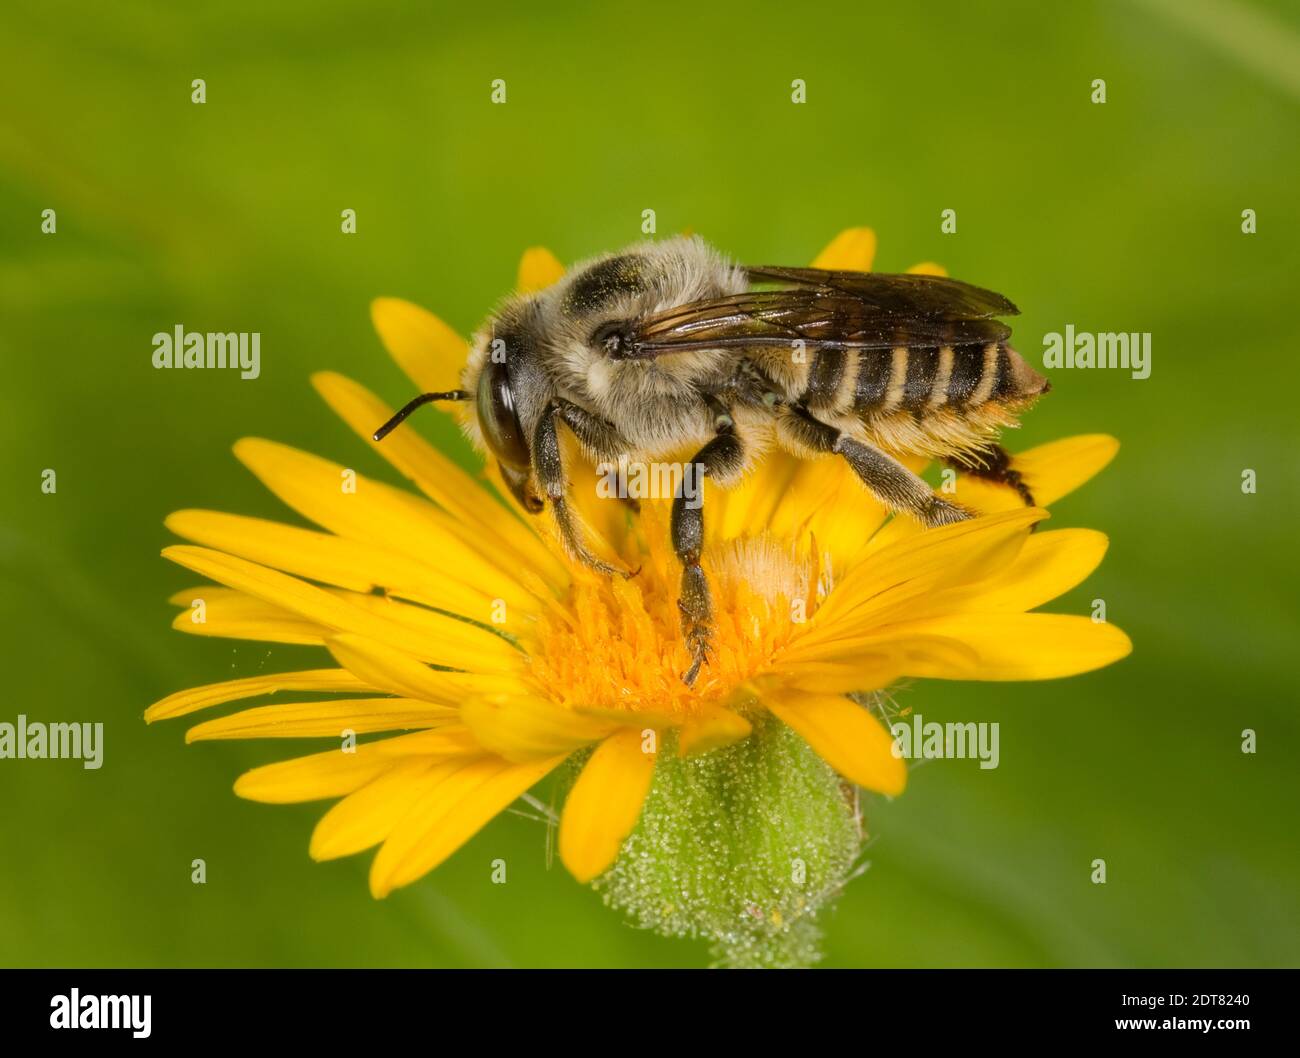 Parallel Leaf-cutter Bee female, Megachile parallela, Megachilidae. Body Length 14 mm. Nectaring at Camphorweed, Heterotheca subaxillaris, Asteraceae. Stock Photo